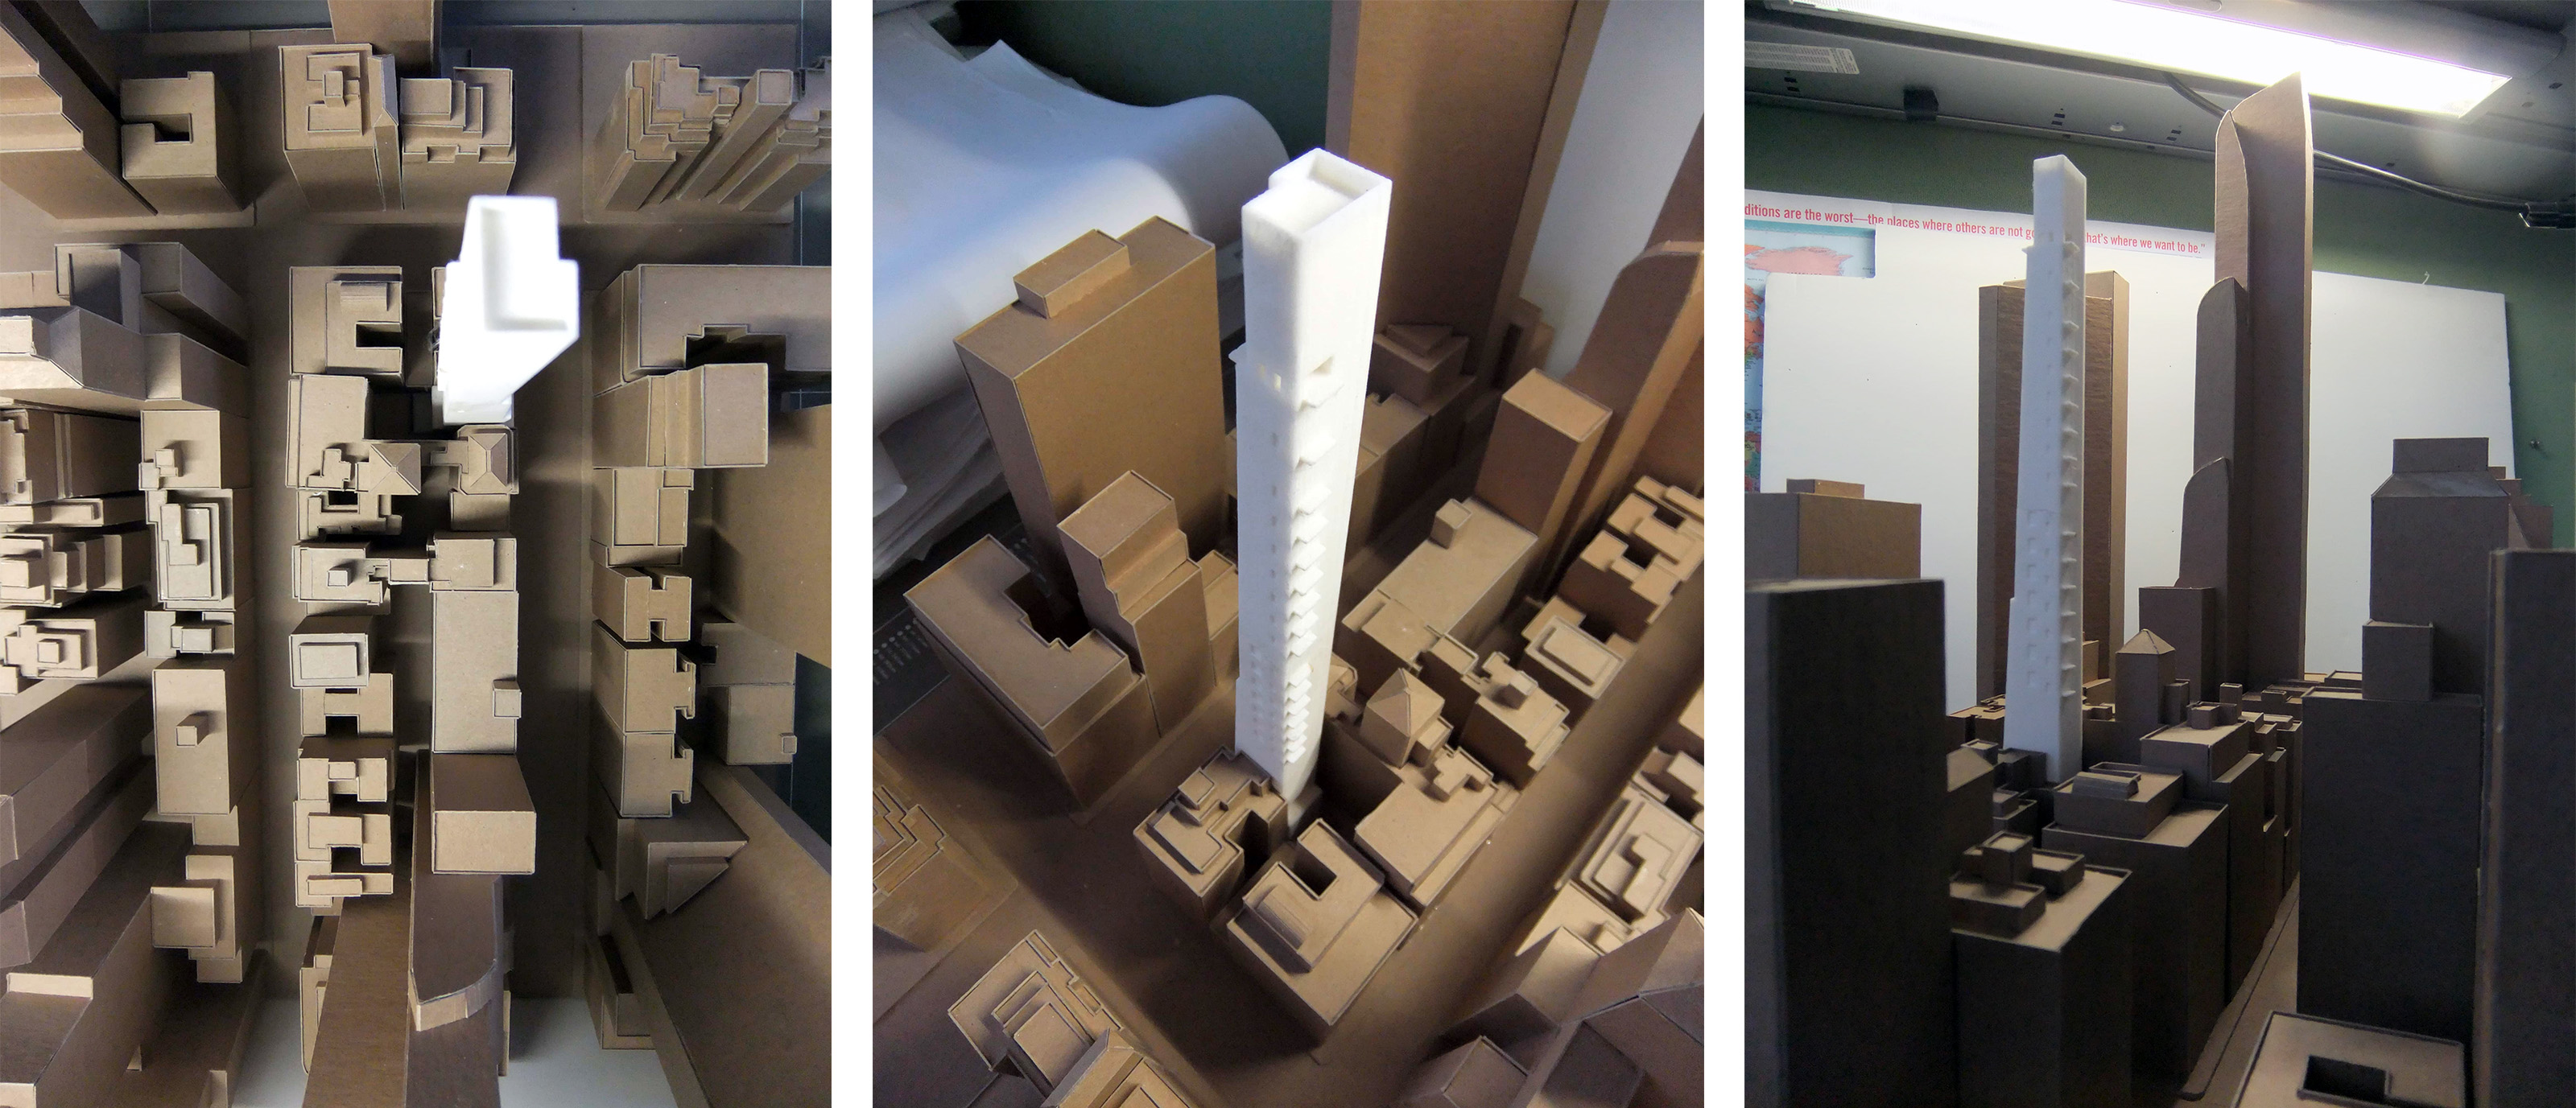 3D printed skyscraper tower surrounded by cardboard model of the site.